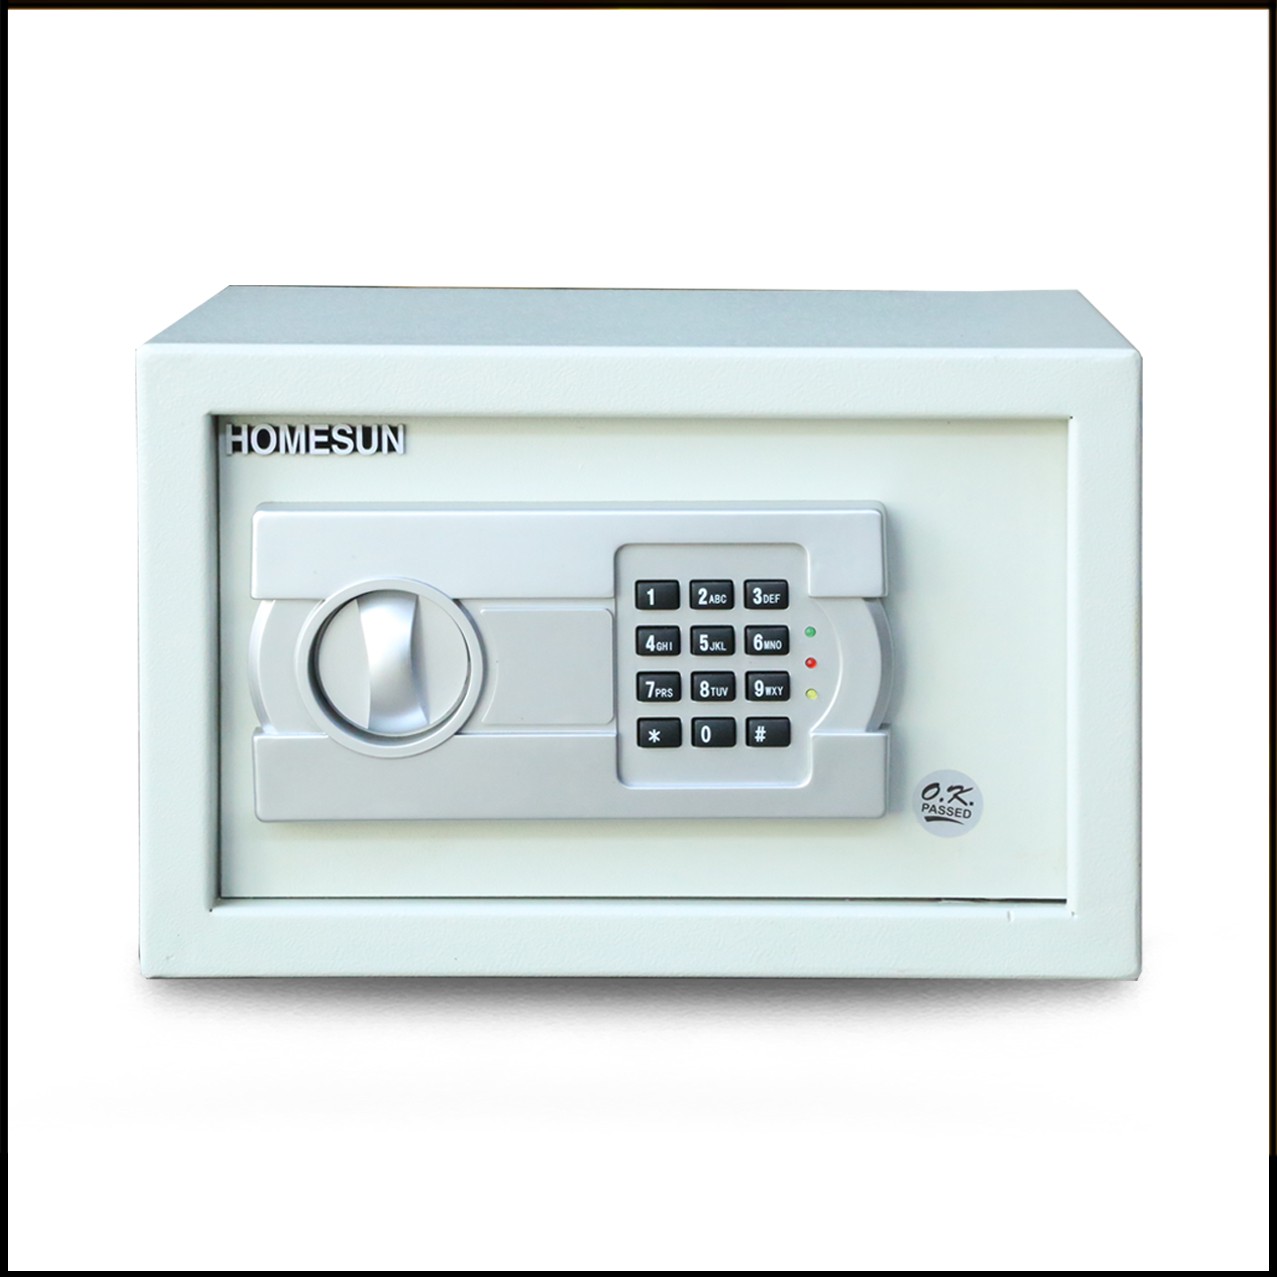 Hotel Safe Dimensions Wholesale Suppliers